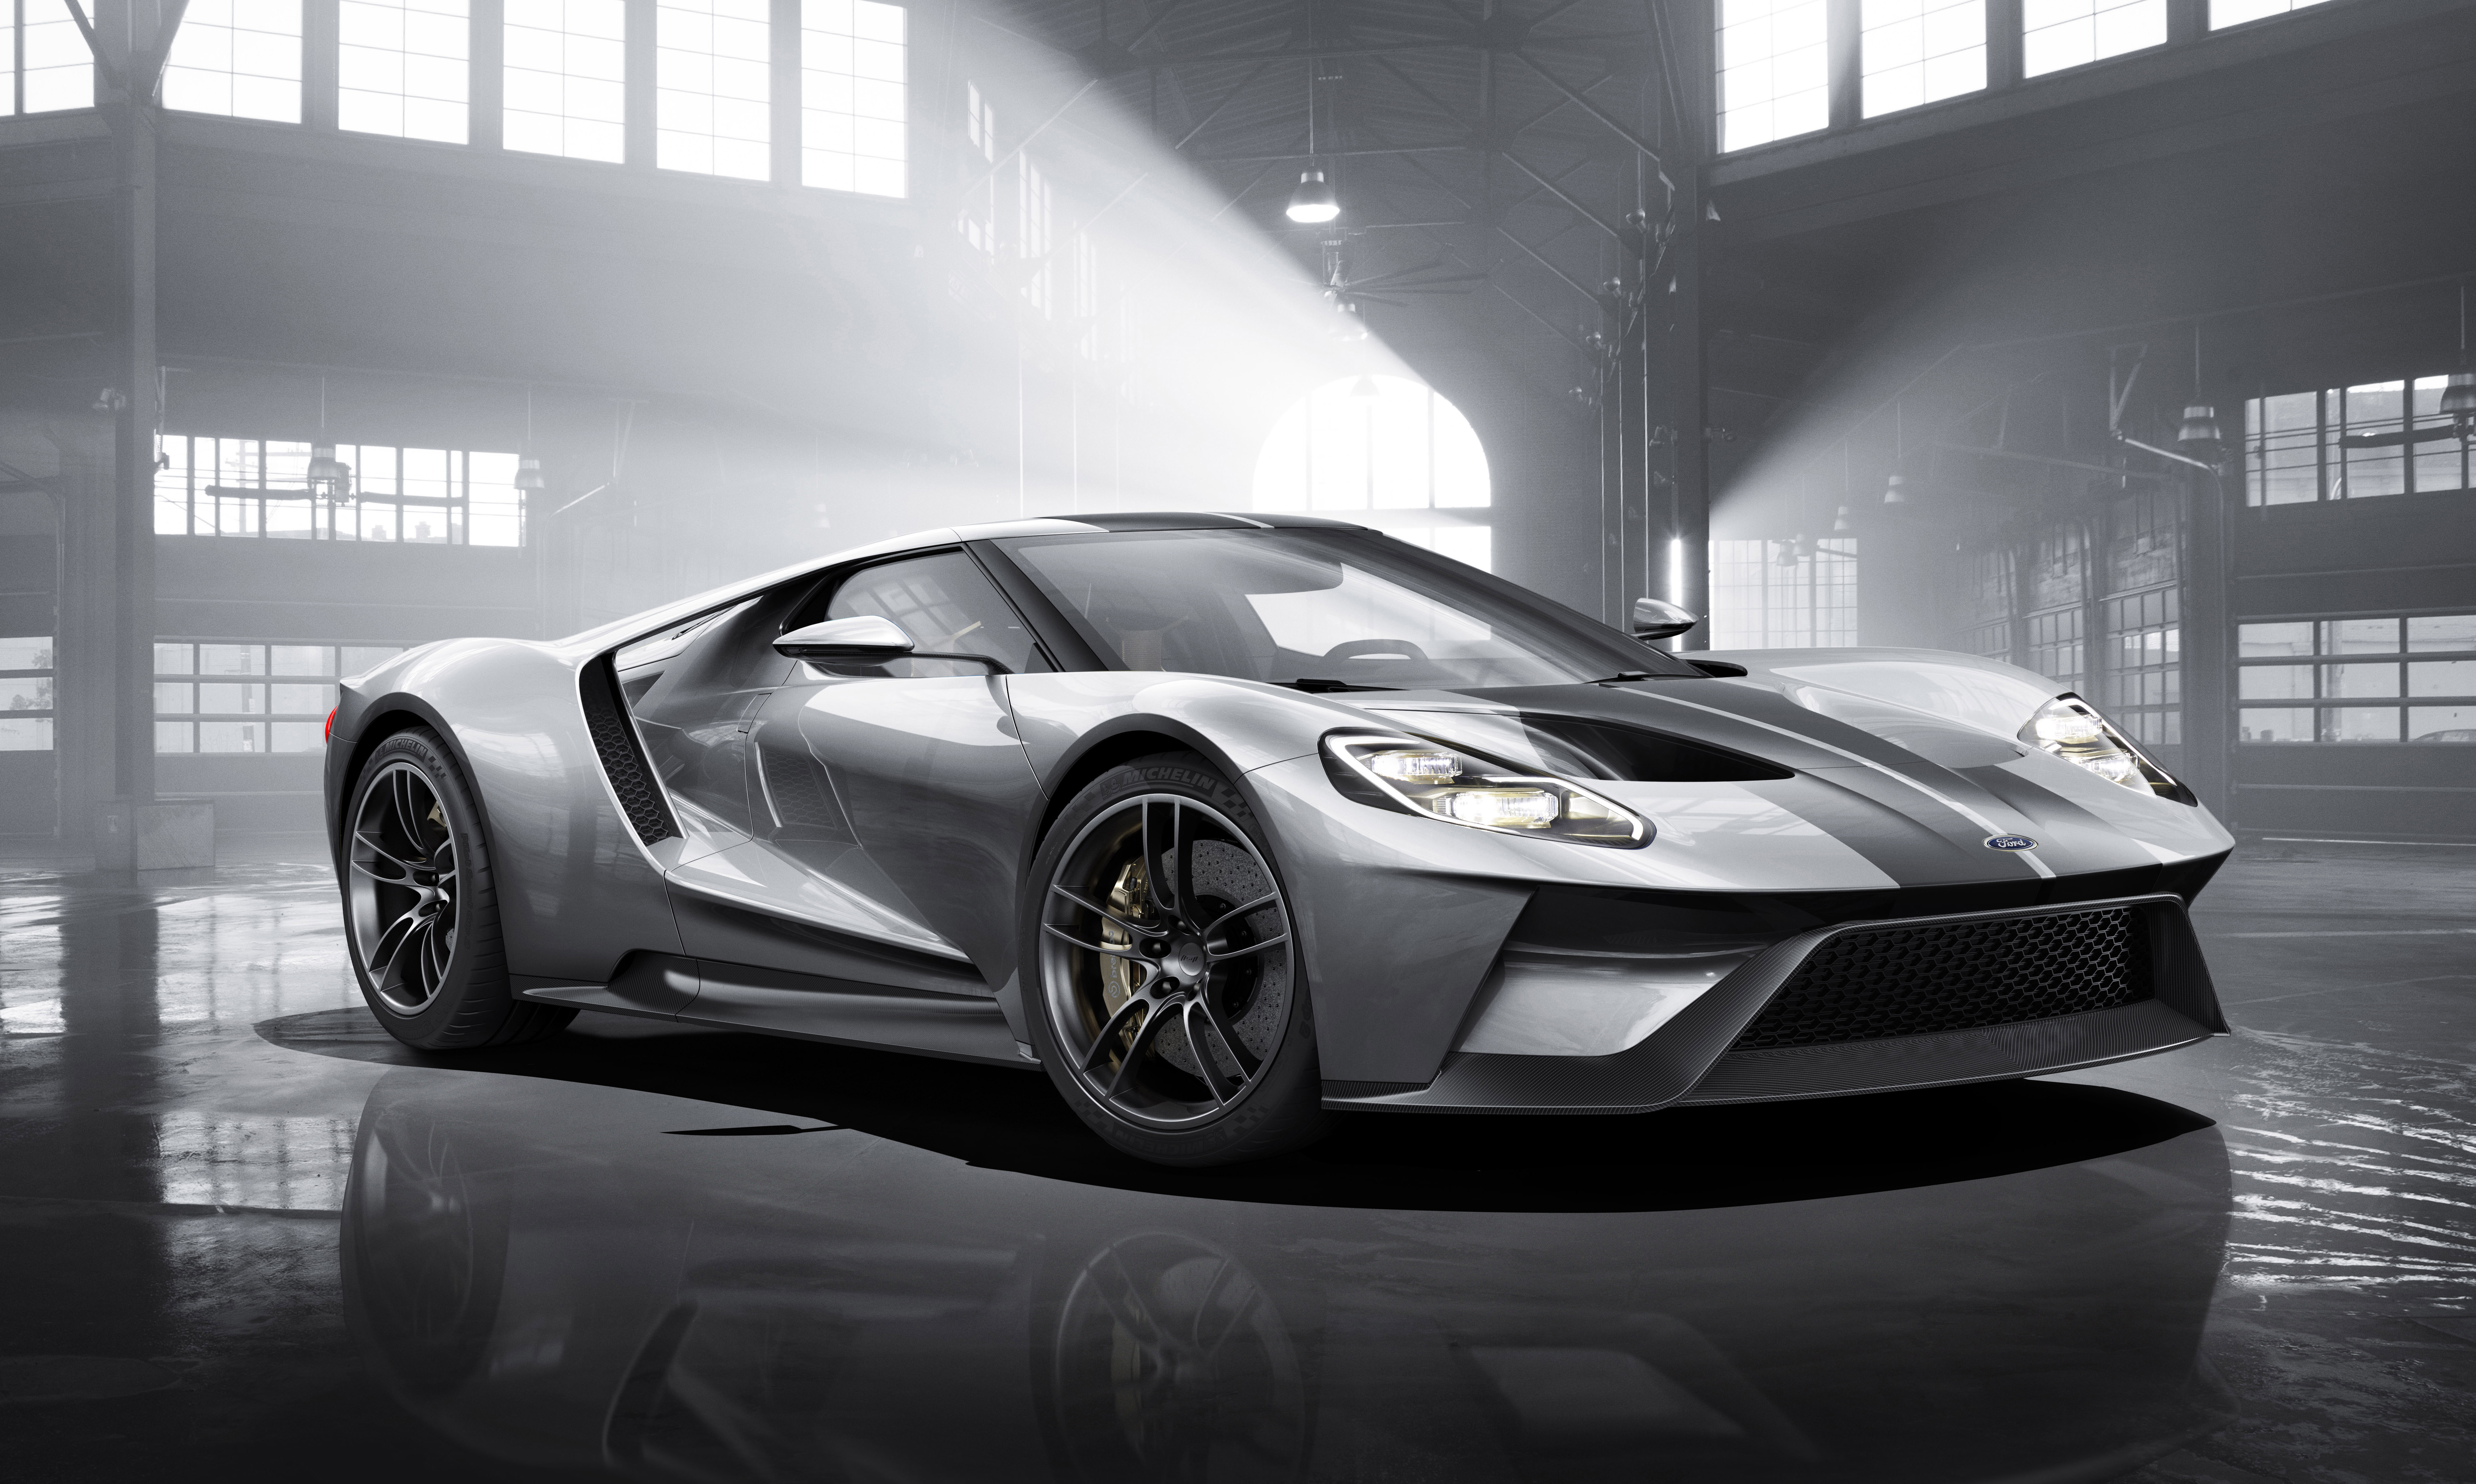 All-new Ford GT in Liquid Silver, L-R, 3/4 Front Shown, February 2015